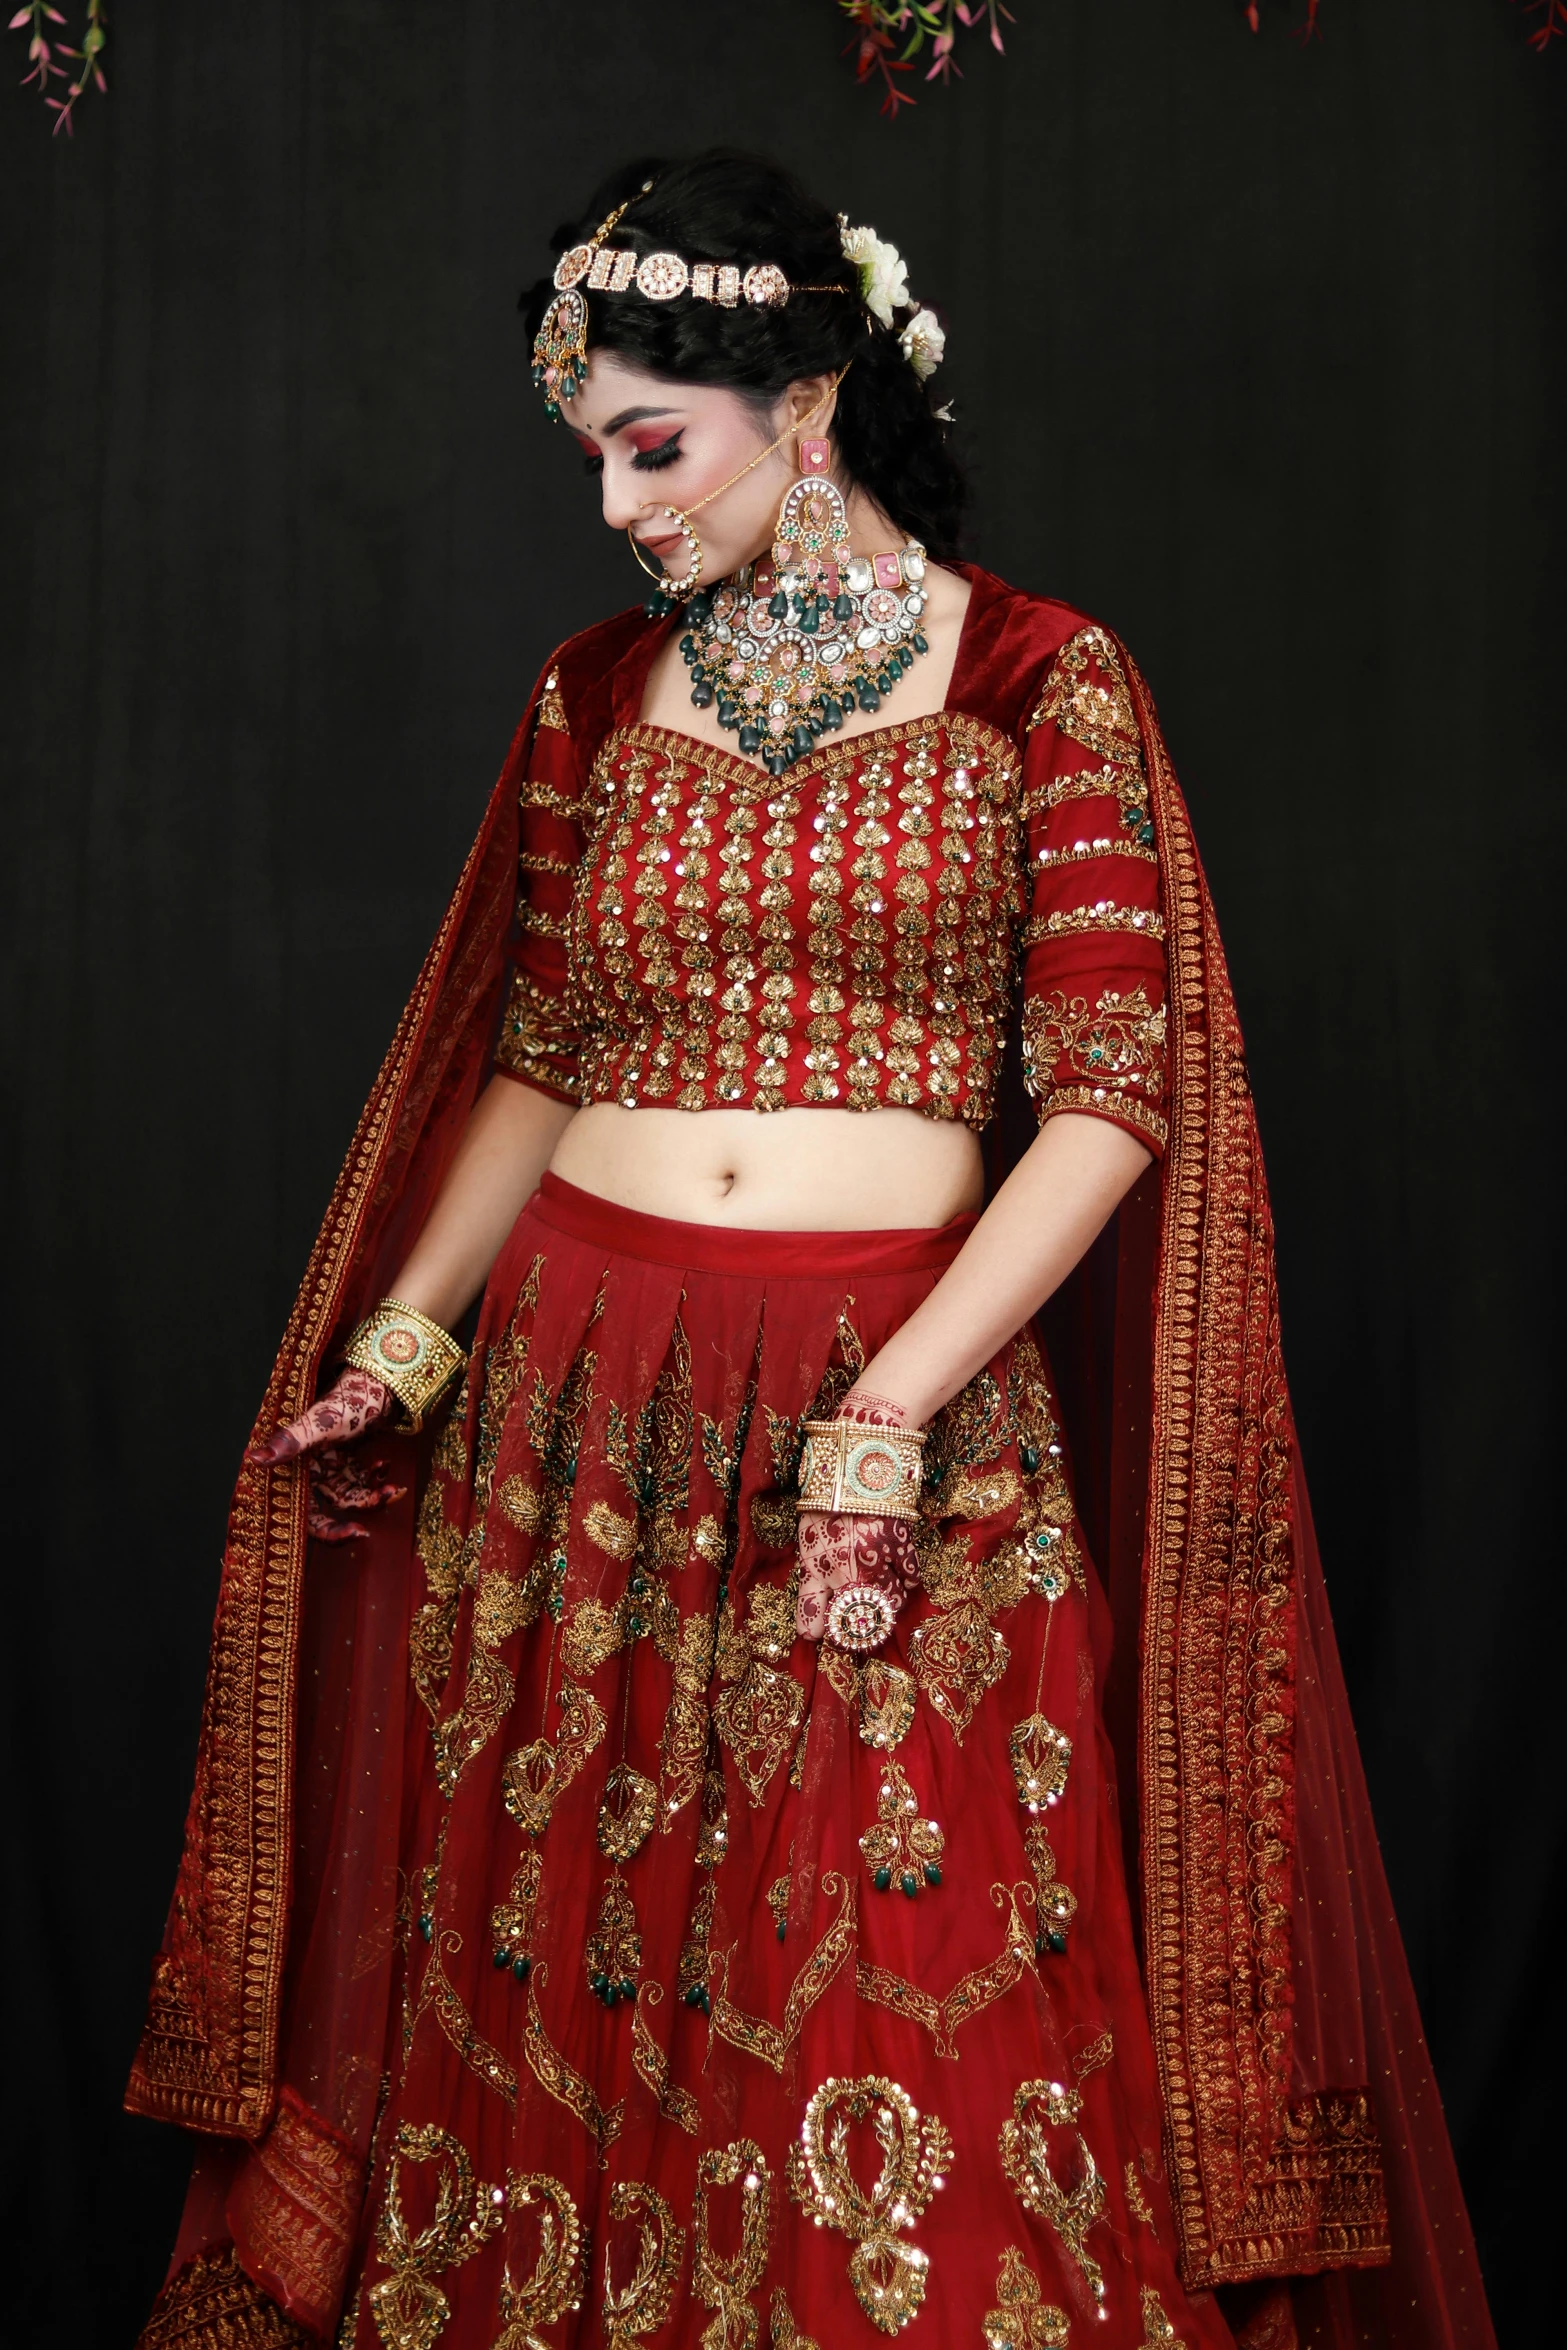 an indian bride wears an intricately decorated red bridal outfit